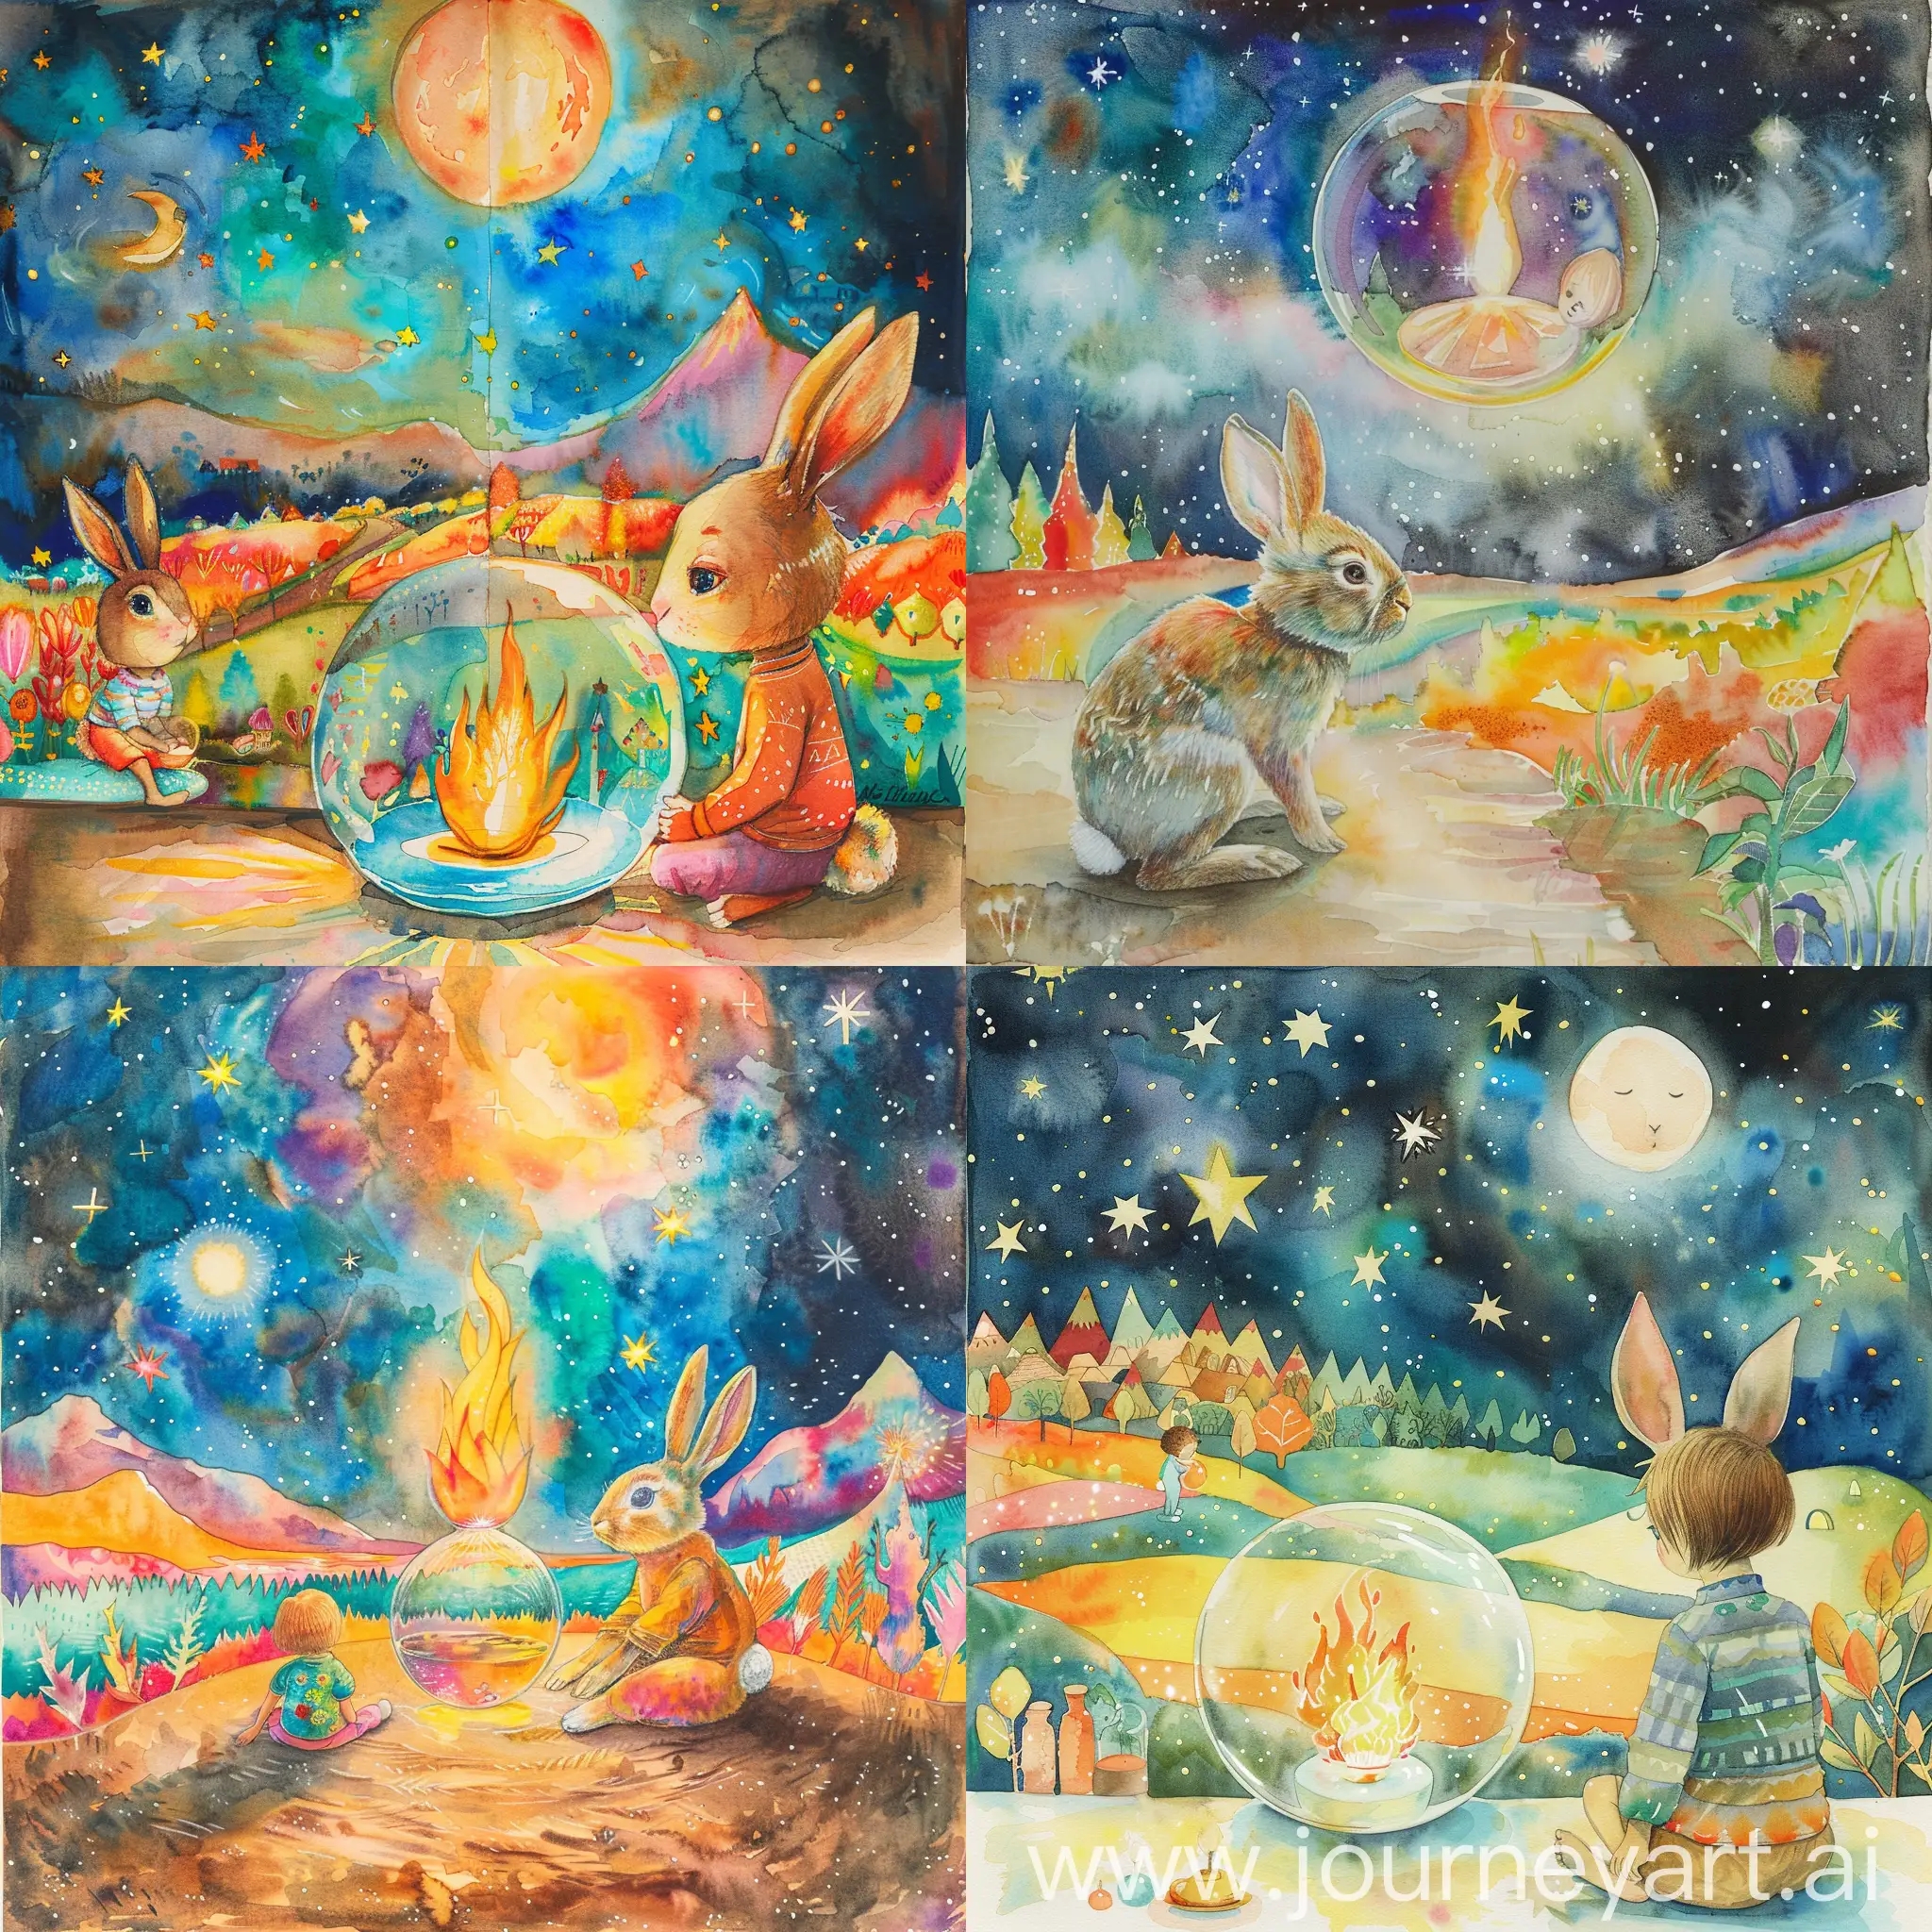 Living room, night, young Rabbit gazing at flame (focus) inside glass orb, watercolor illustration of surrounded by bright stars, colorful landscape and child gazing at glass orb on reverse.